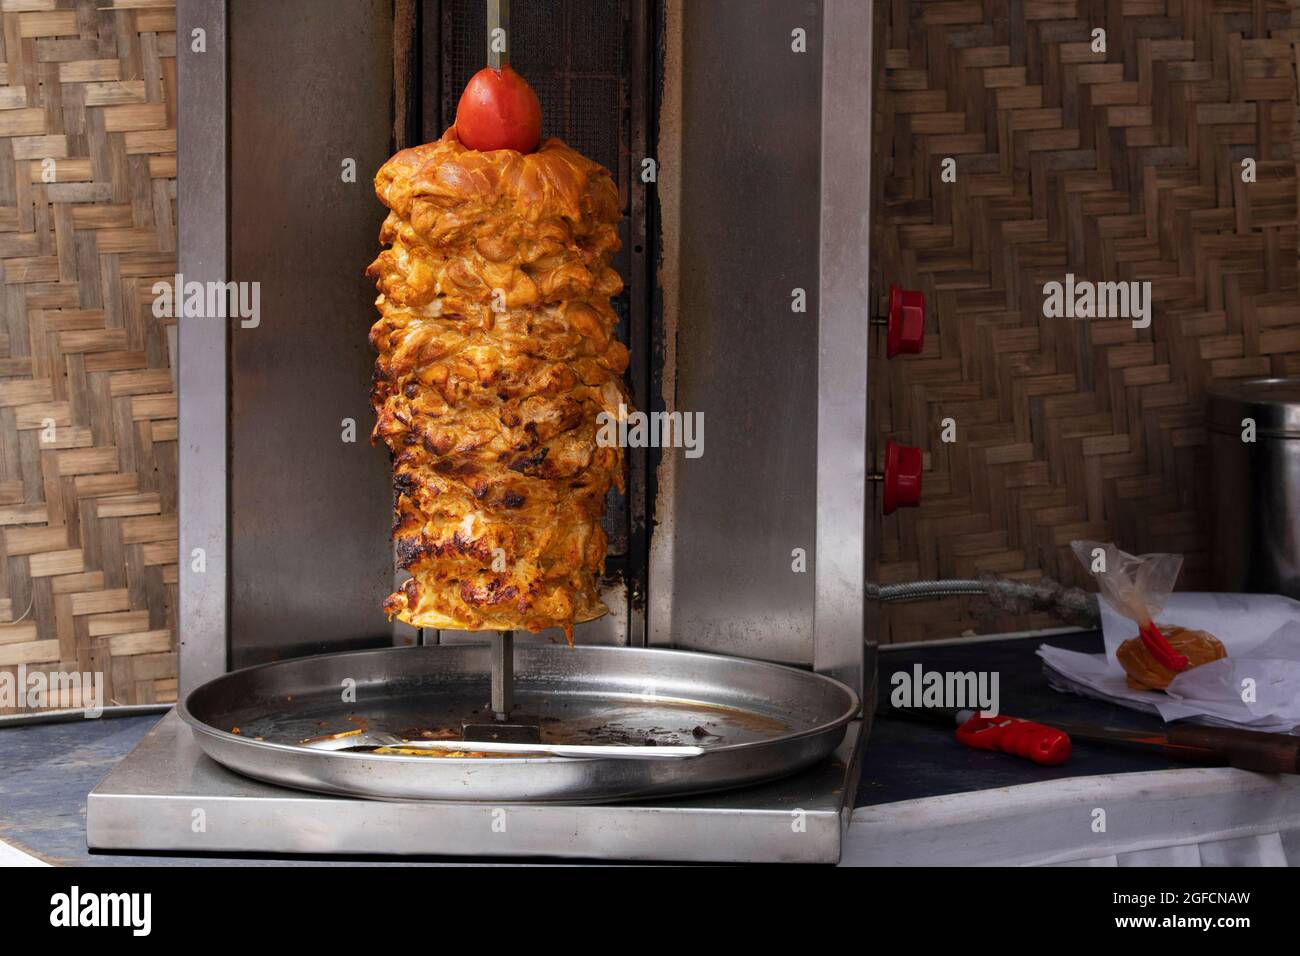 Shawarma an Arab dish with meat cut into thin slices stacked in a cone-like shape and roasted on a slowly-turning vertical rotisserie, Pune, Maharasht Stock Photo